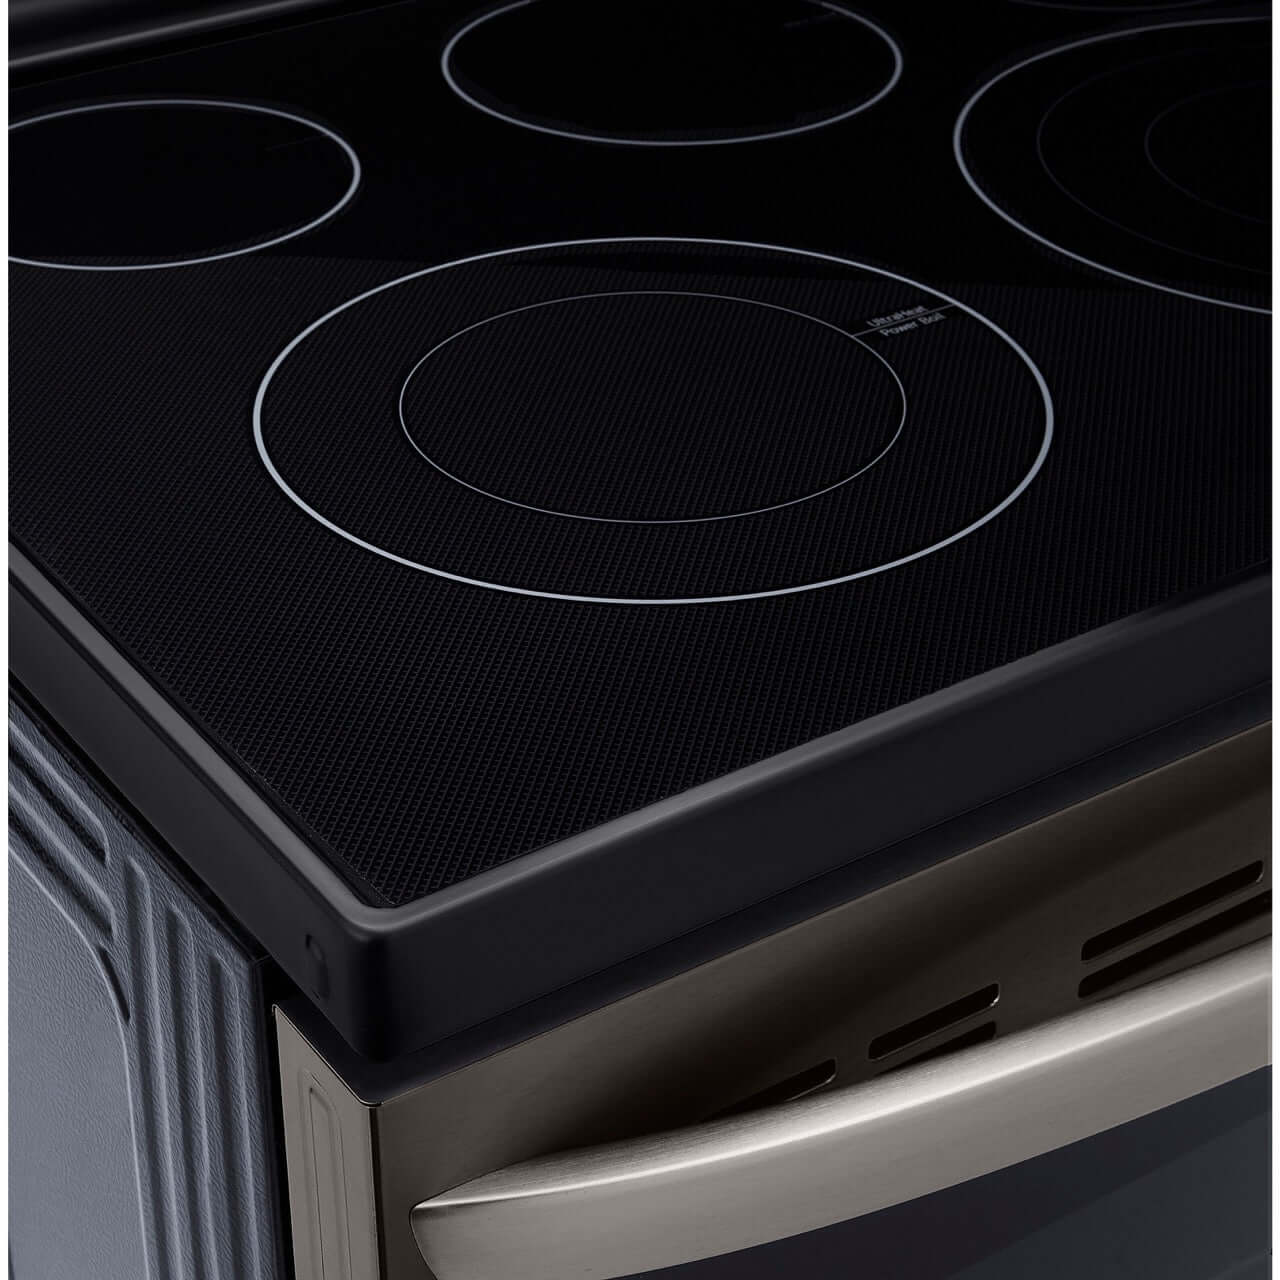 LG 6.3-Cu. Ft. Electric Smart Range with InstaView and AirFry, Black Stainless Steel (LREL6325D)